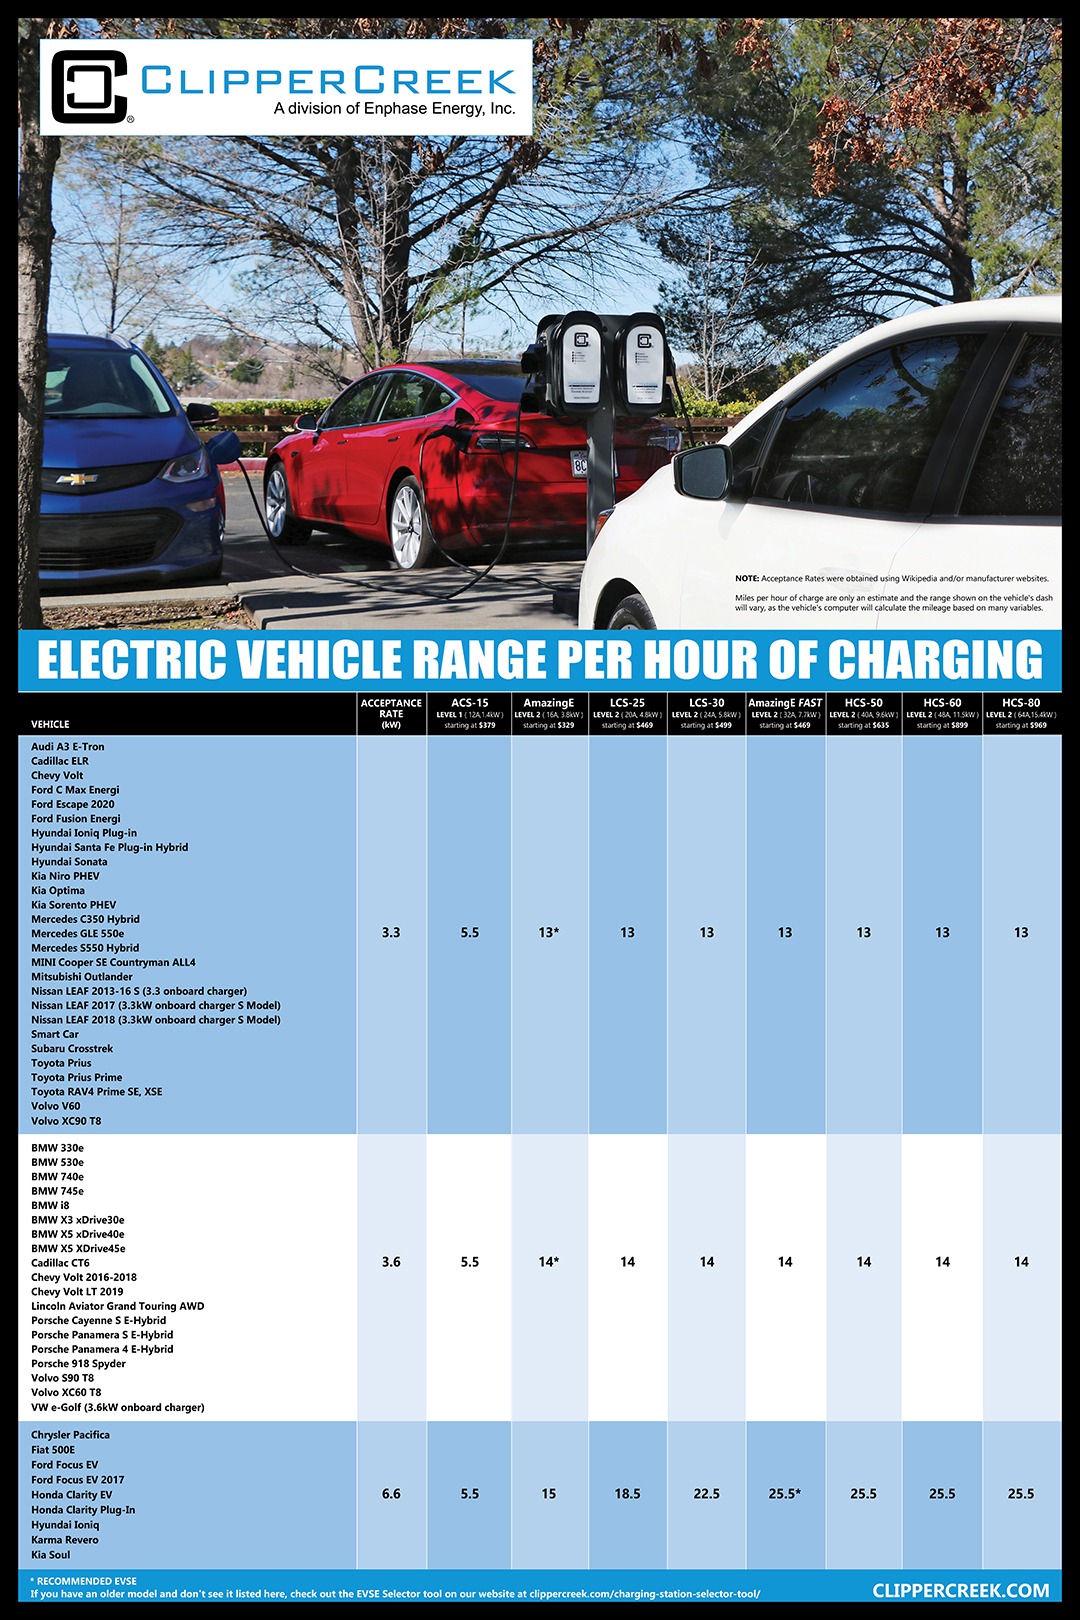 range-per-hour-of-charging-chart-20220127-FINAL-page-1-large.jpg